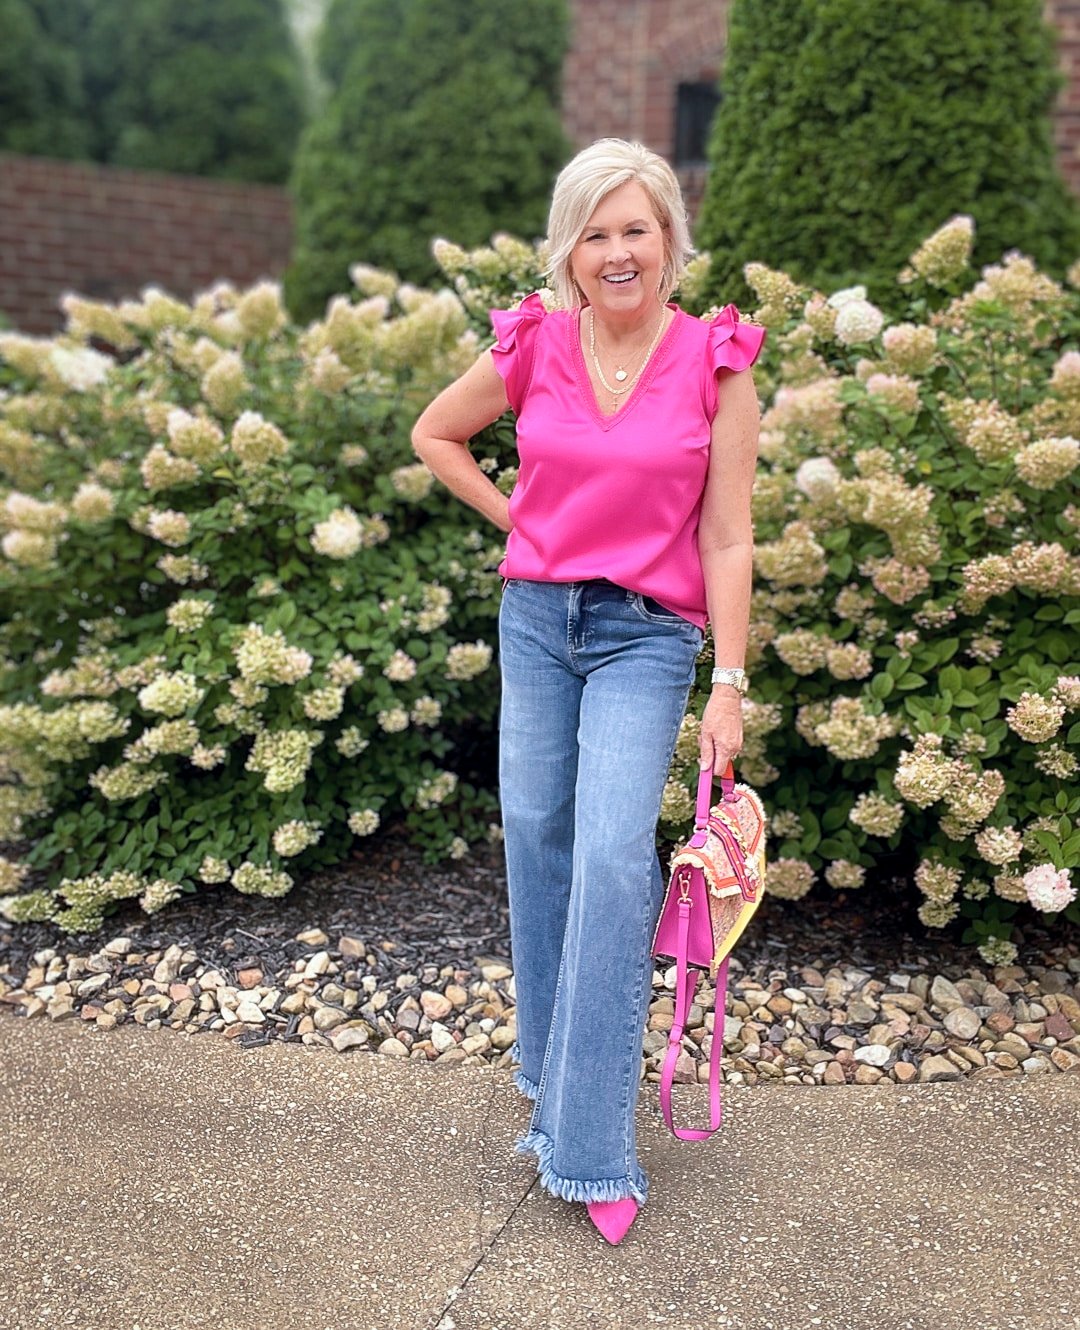 Over 40 Fashion Blogger, Tania Stephens is styling wide leg jeans with a pink ruffled top 6